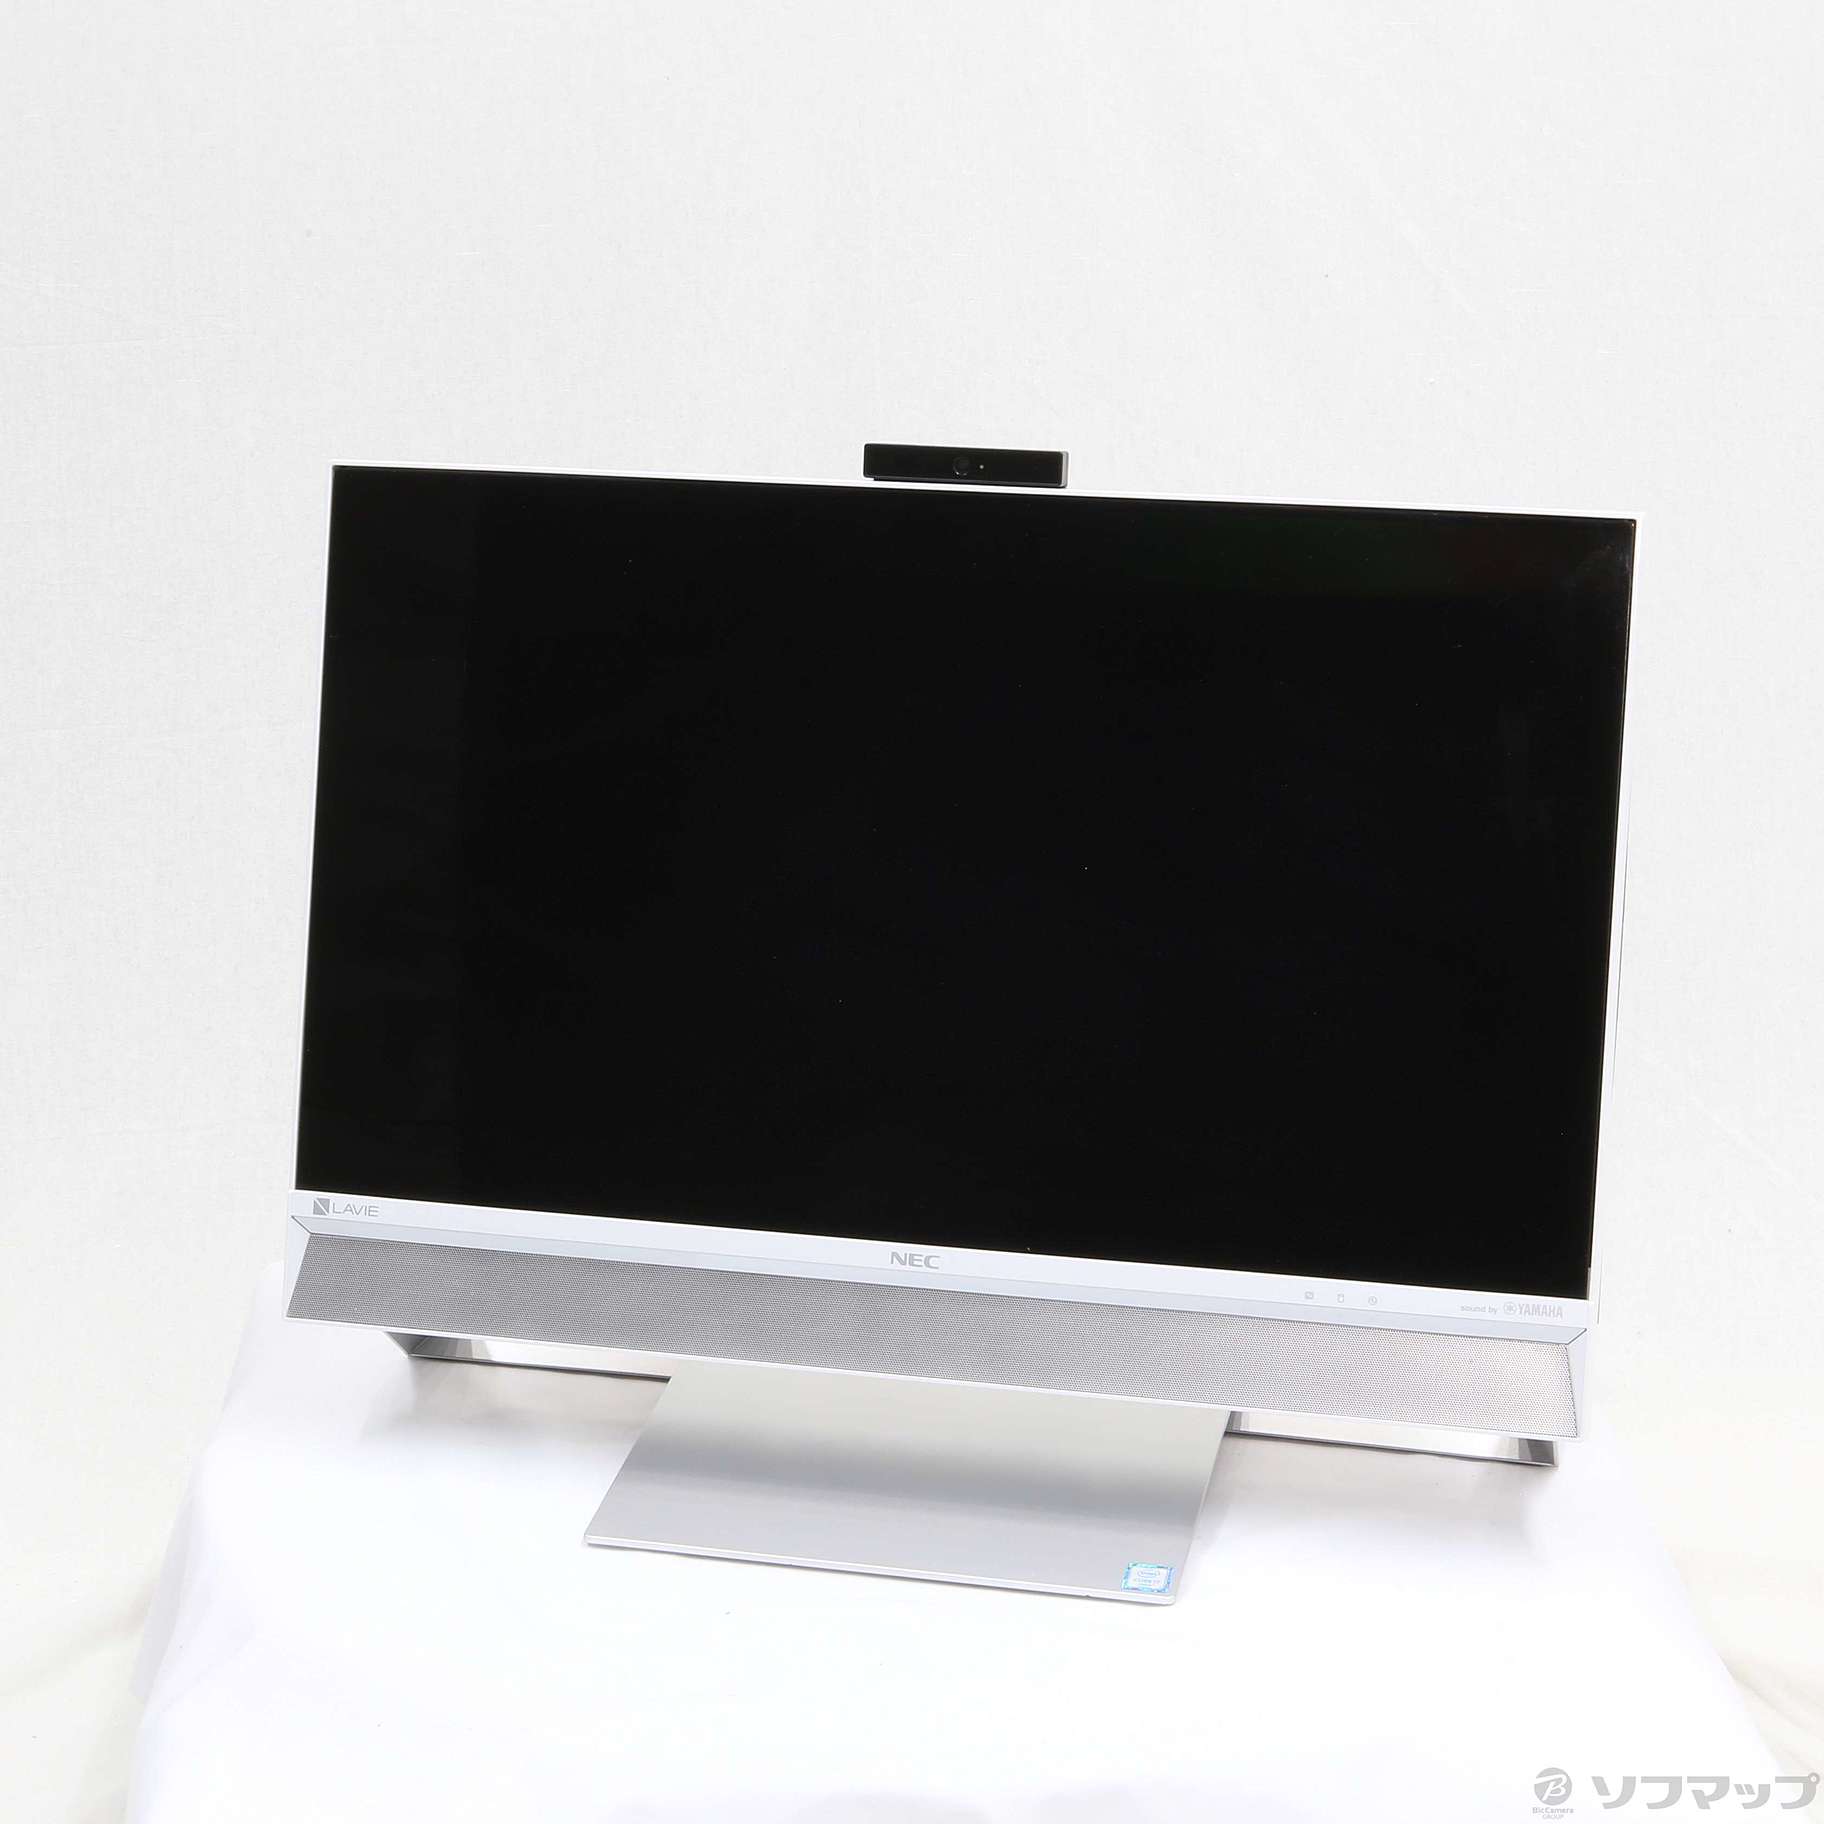 LAVIE Desk All-in-one PC-DA770FAW ファインホワイト 〔NEC Refreshed PC〕 〔Windows 10〕  ≪メーカー保証あり≫